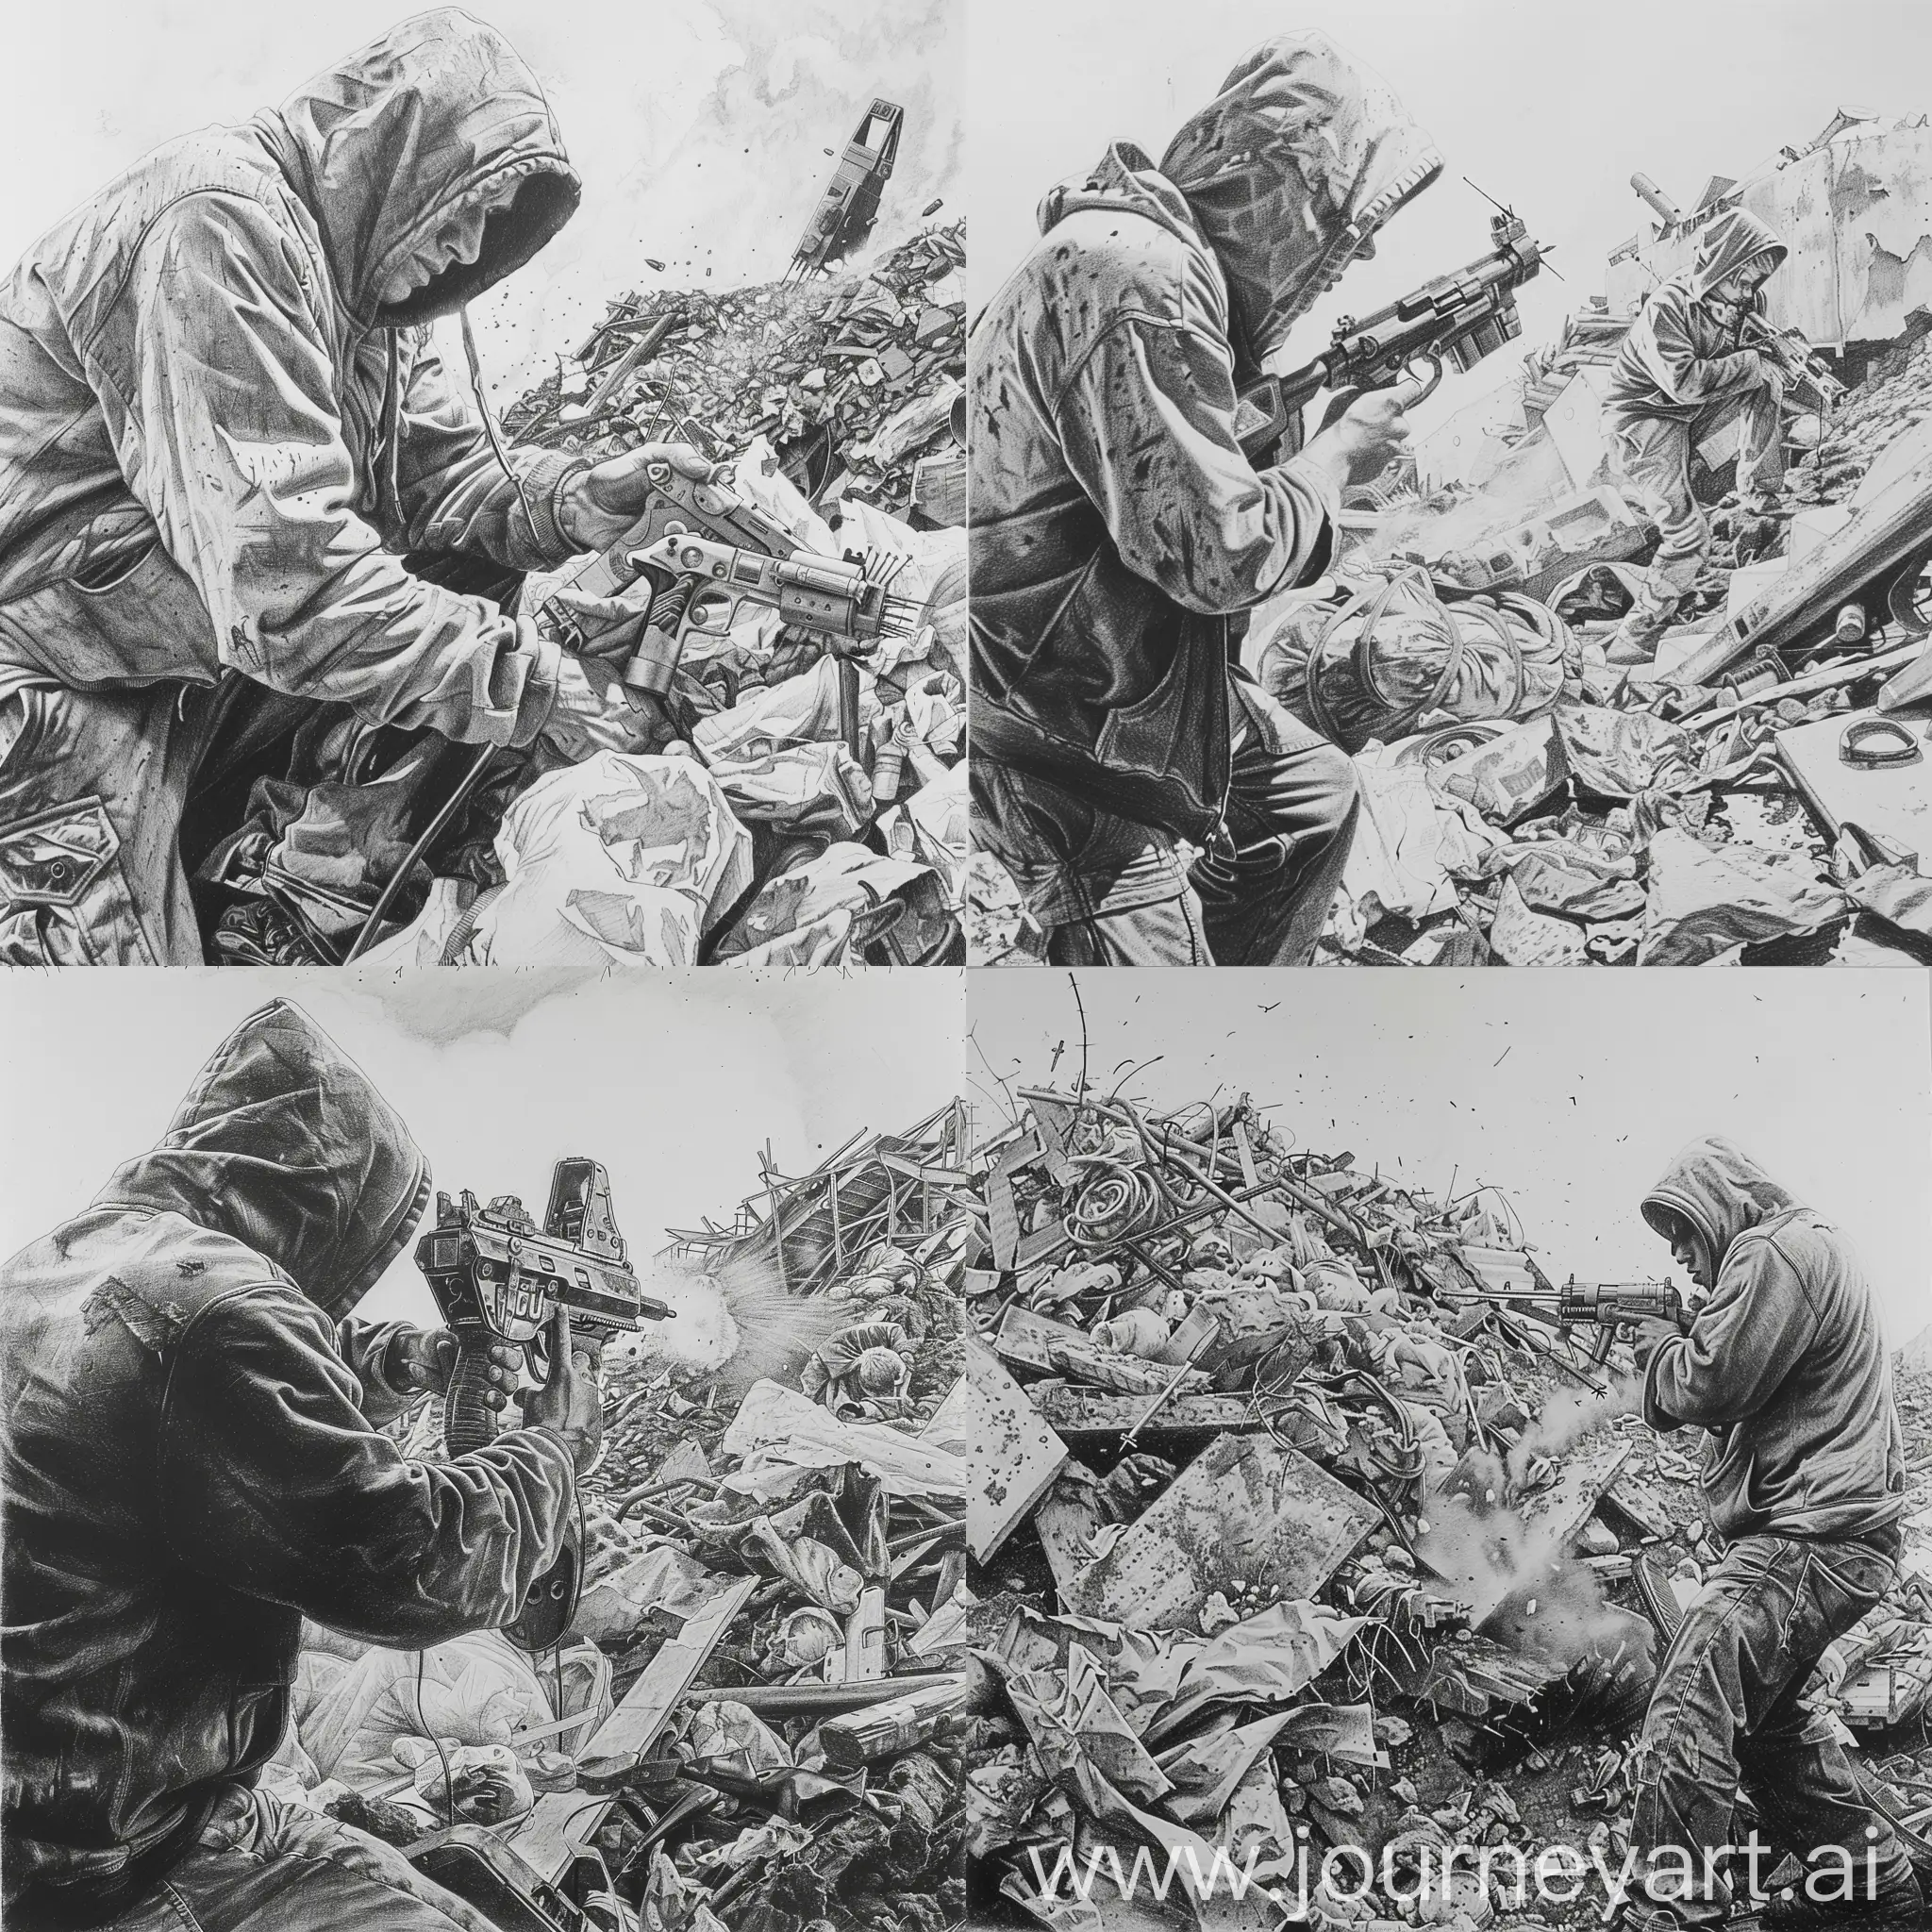 pencil drawing, black and white, huge dump, a guy in a hood, a guy using a nail gun as a pistol